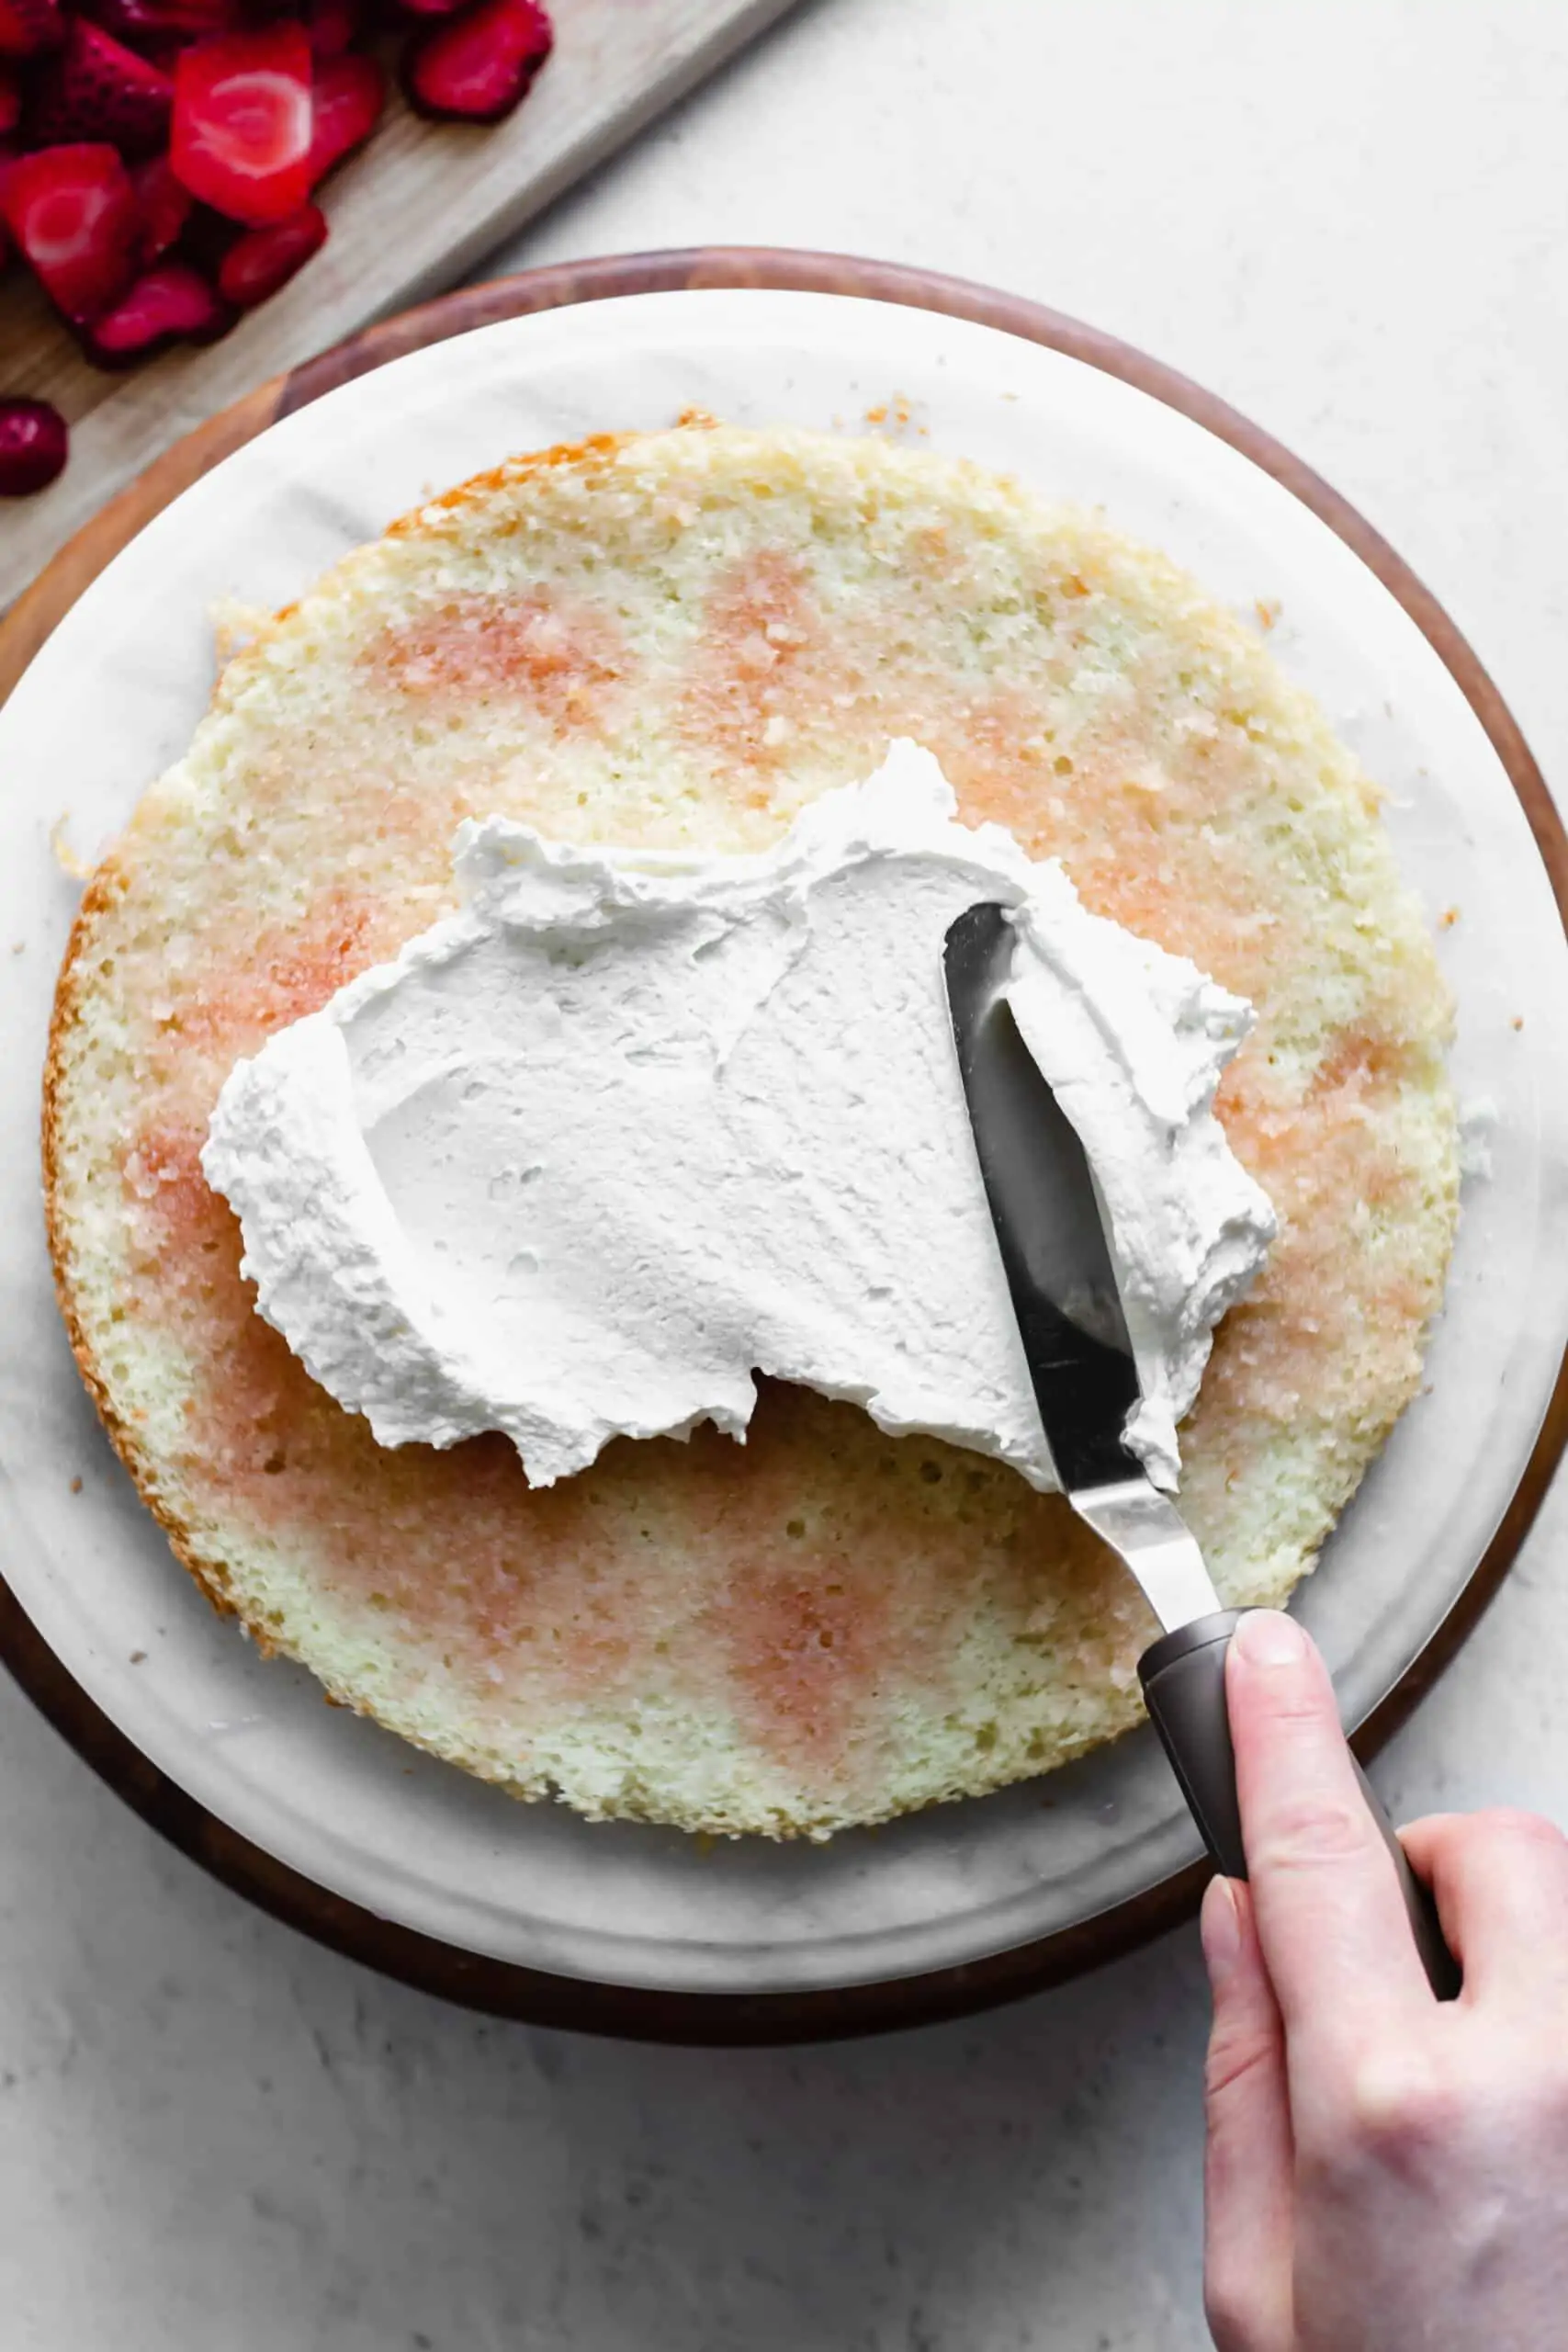 Whipped cream gets spread onto the cake layer doused with strawberry simple syrup